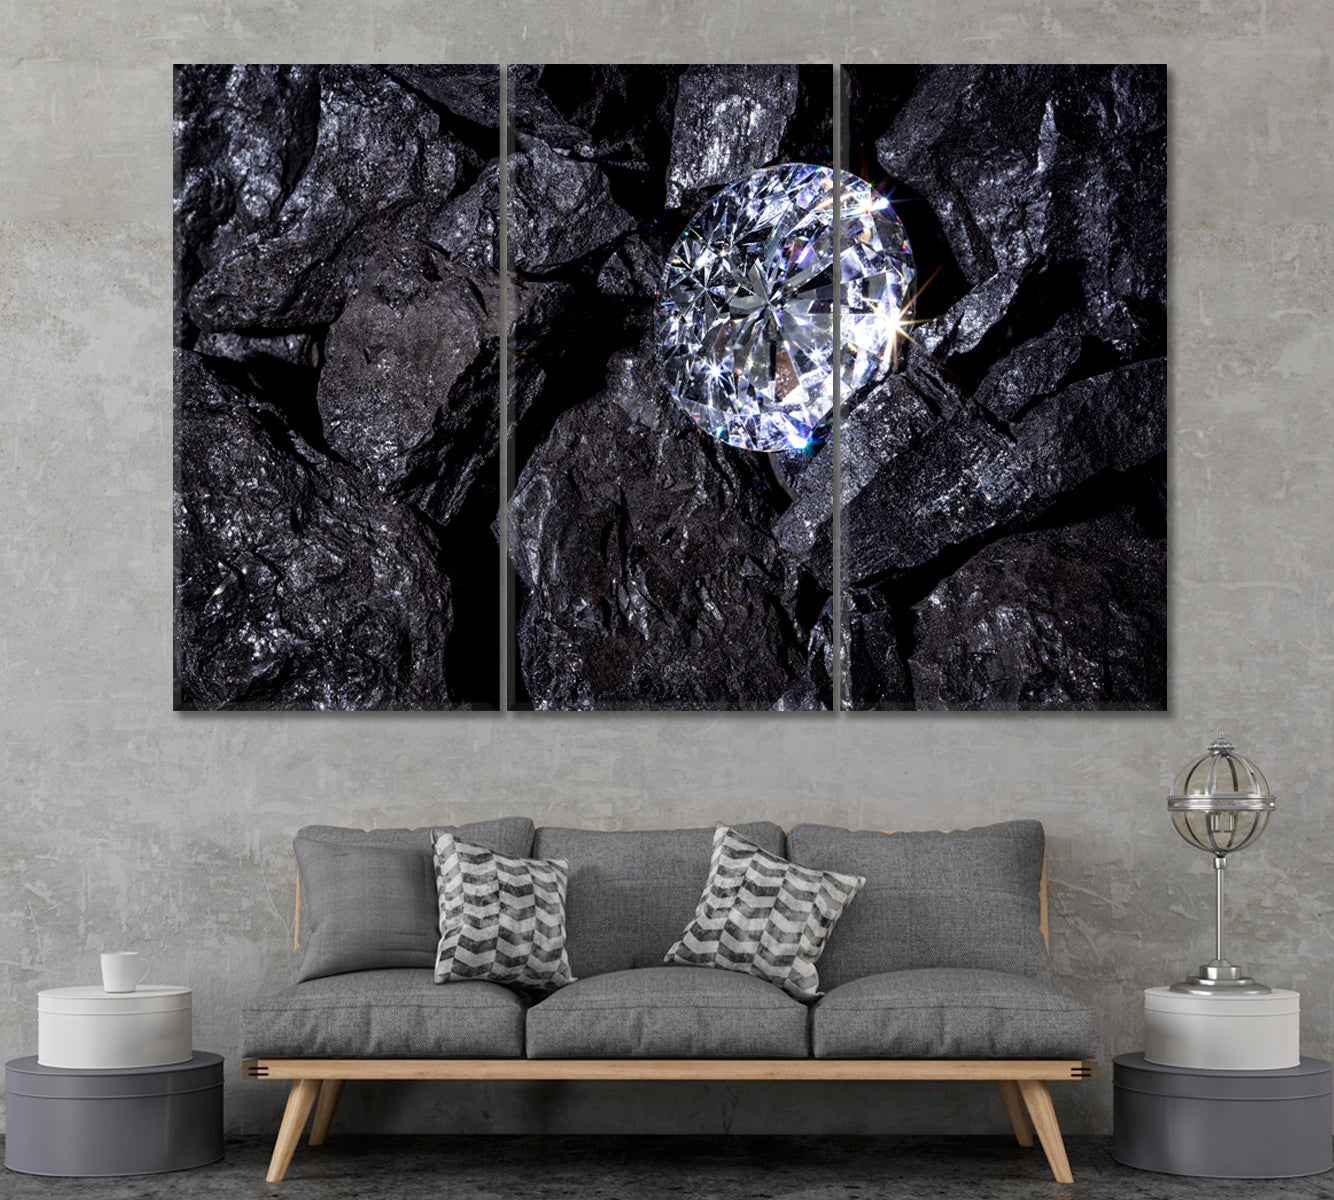 Diamond Among Pieces of Coal Canvas Print ArtLexy 3 Panels 36"x24" inches 